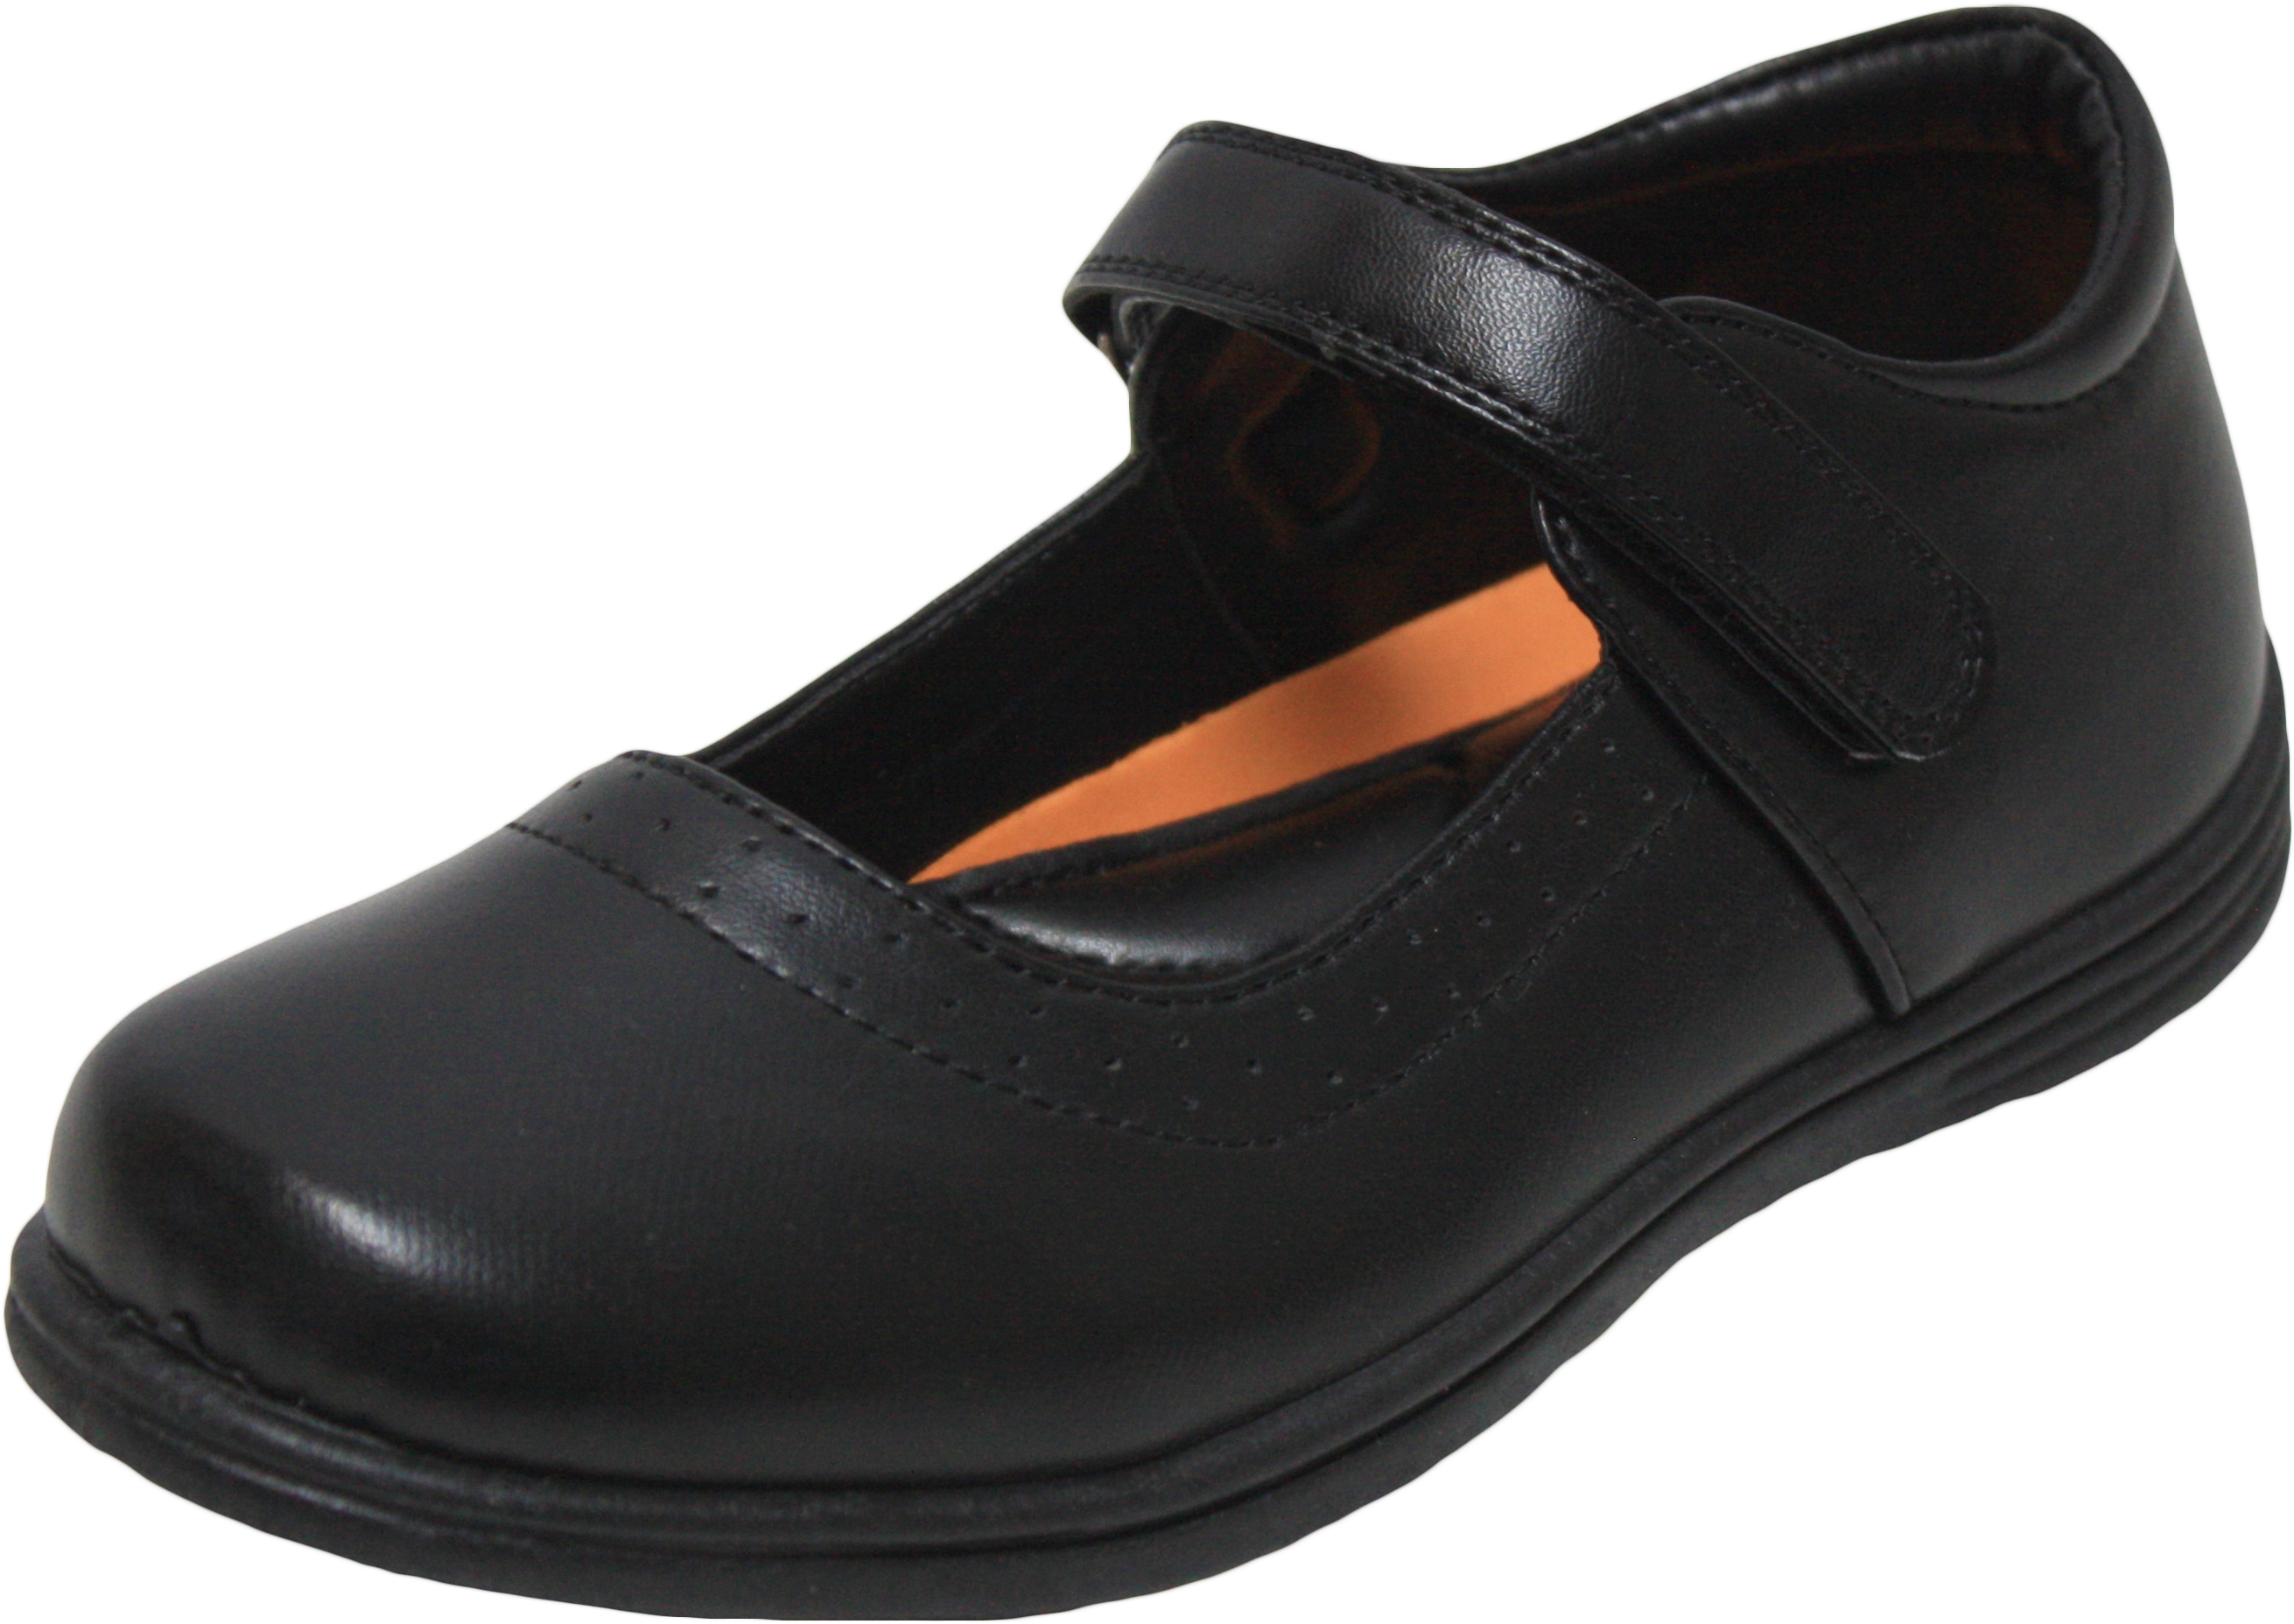 Girls School Shoes Black - Girls Black School Shoes Mary Jane Style (2662x1899), Png Download